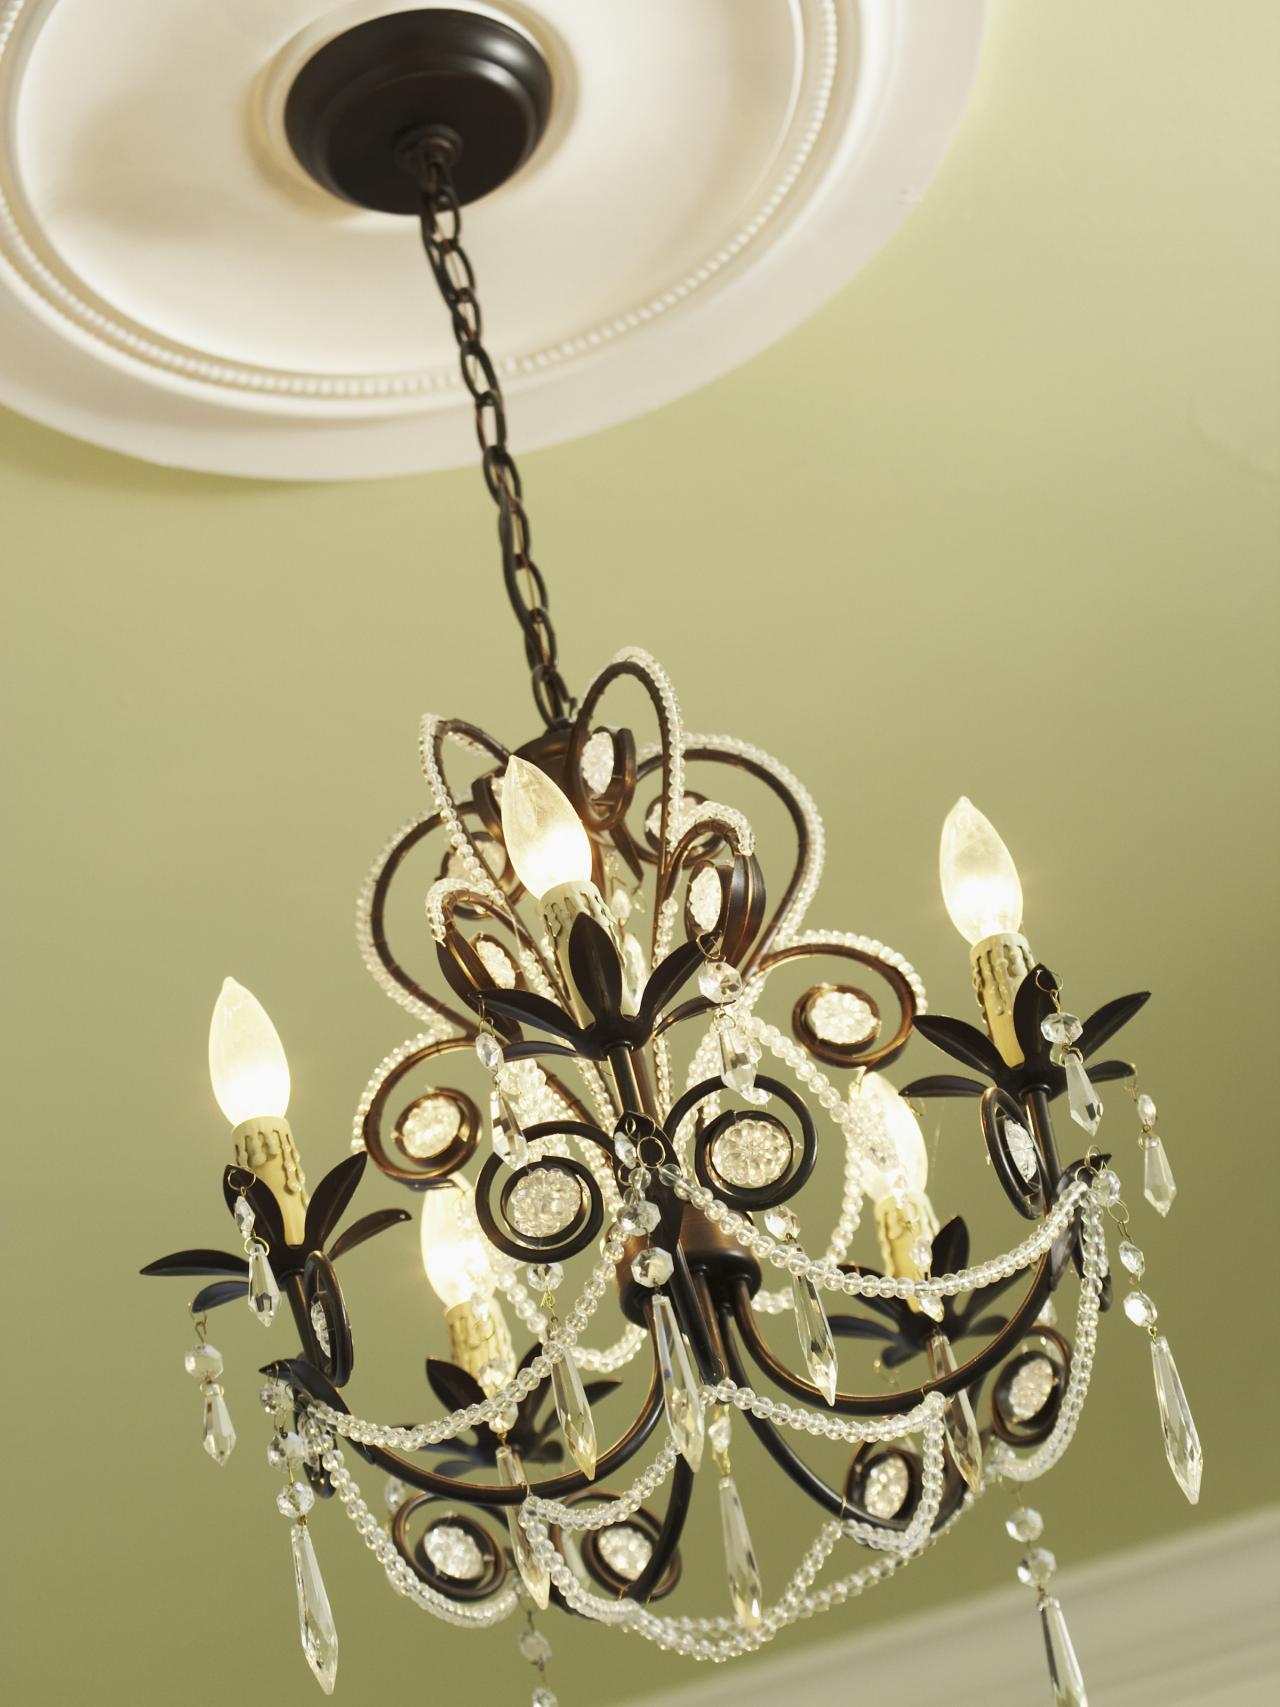 How To Install A Decorative Ceiling Medallion - How To Fix Heavy Chandelier Ceiling